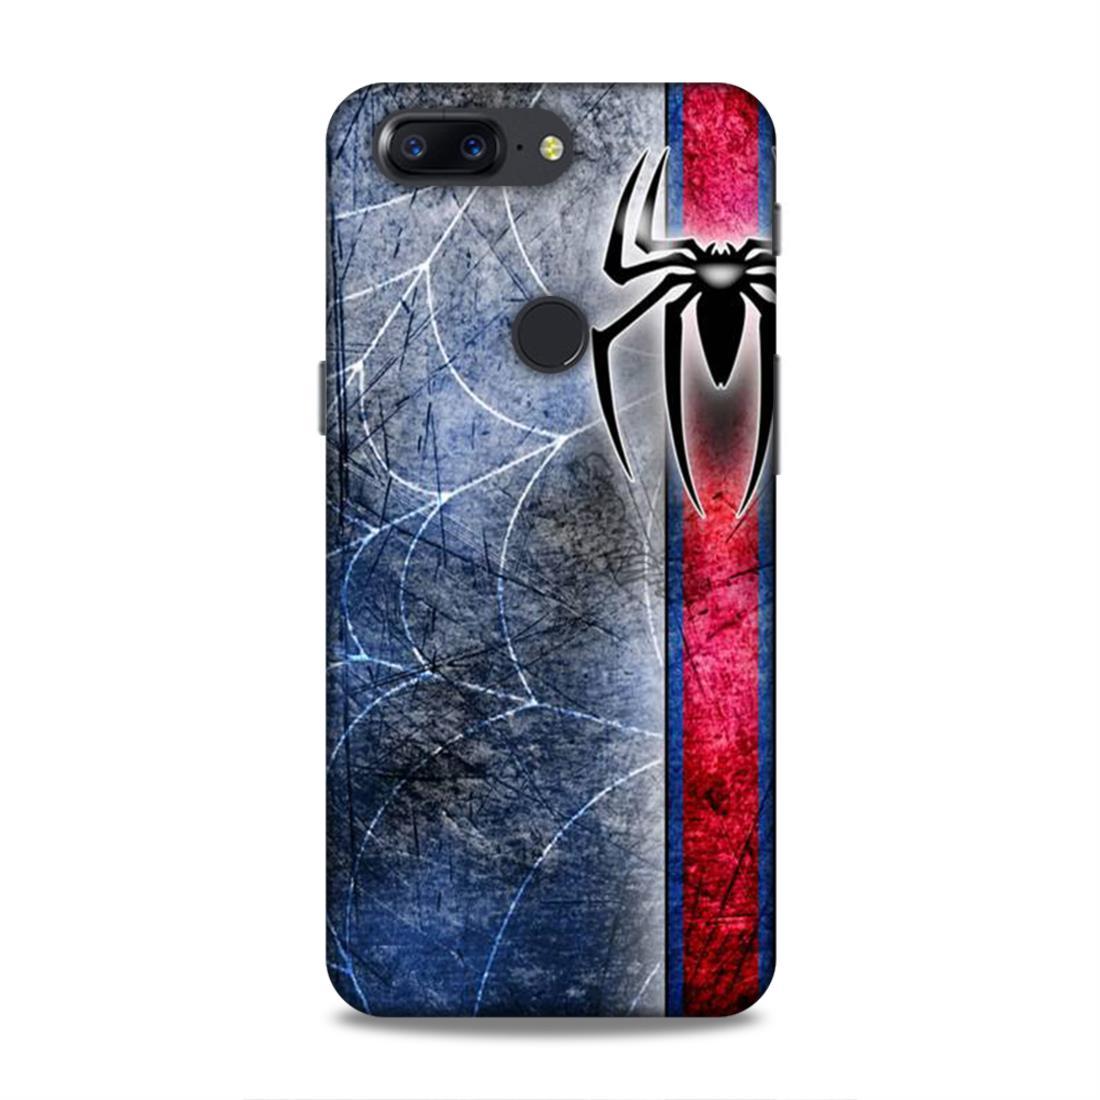 Spider Pattern OnePlus 5T Phone Back Cover